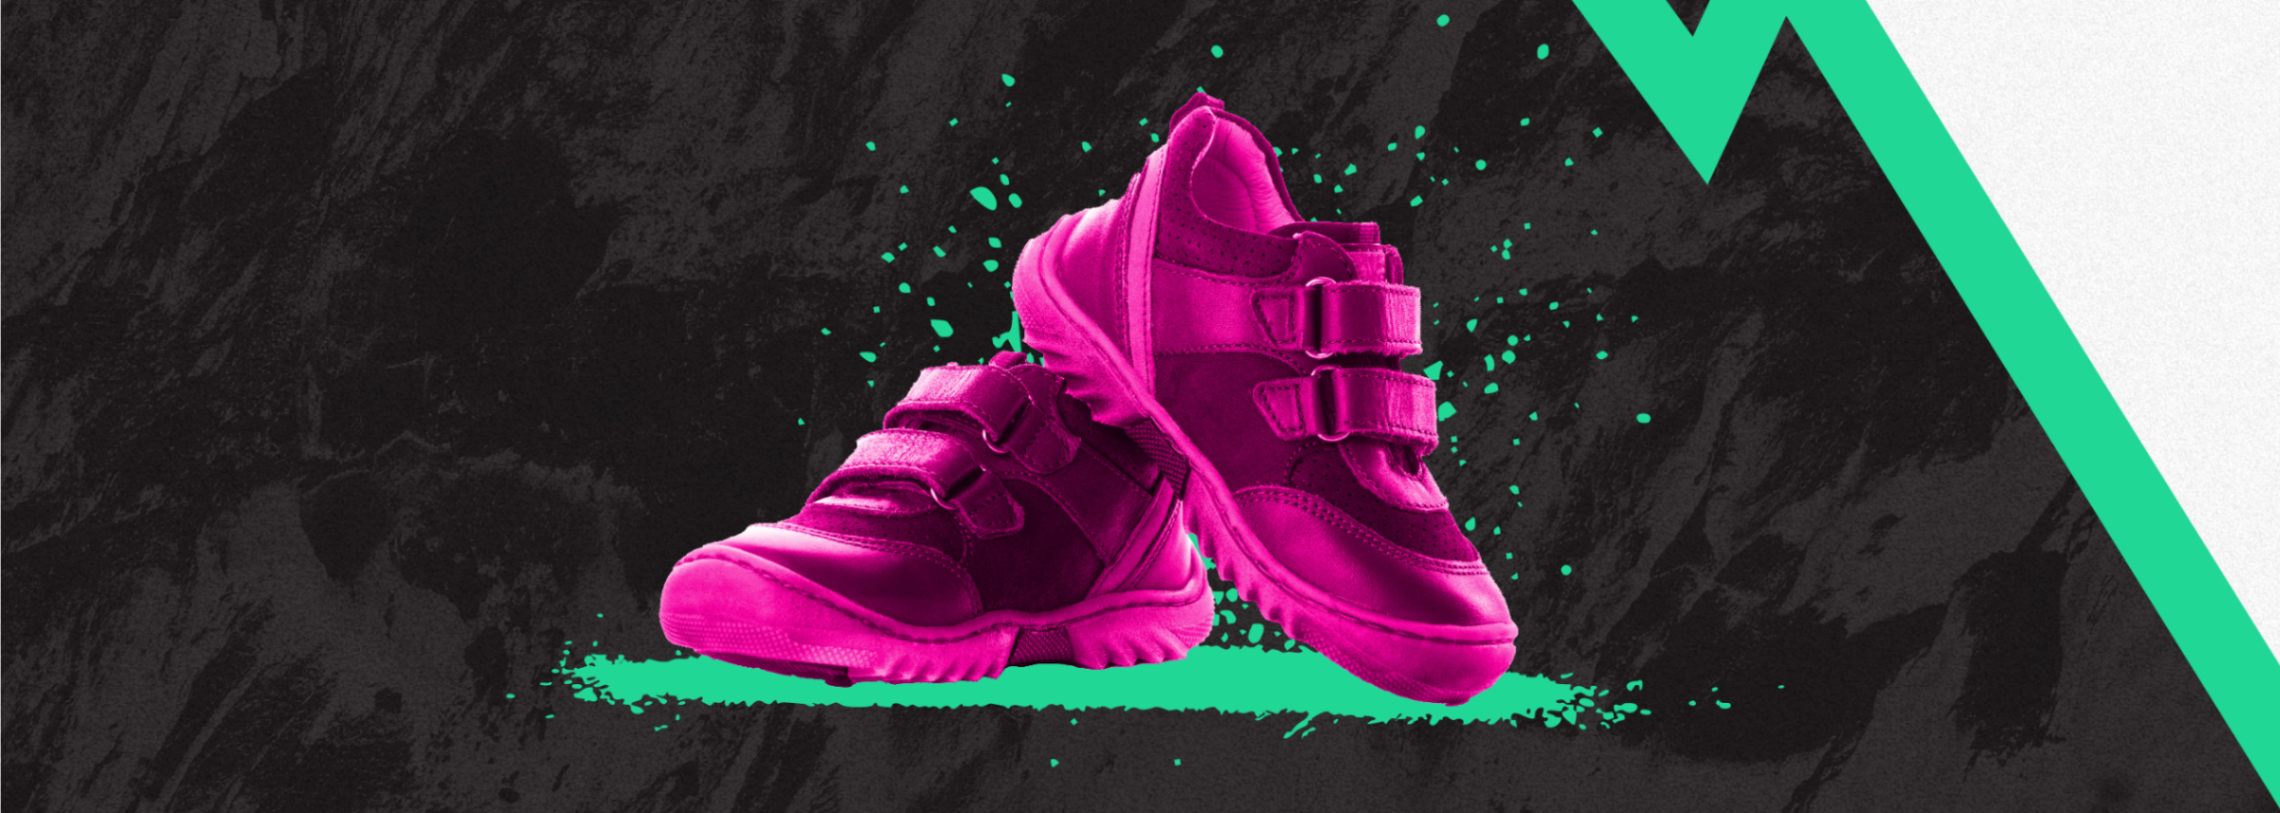 Kids and Youth Sneakers - Mountain Kids Outfitters